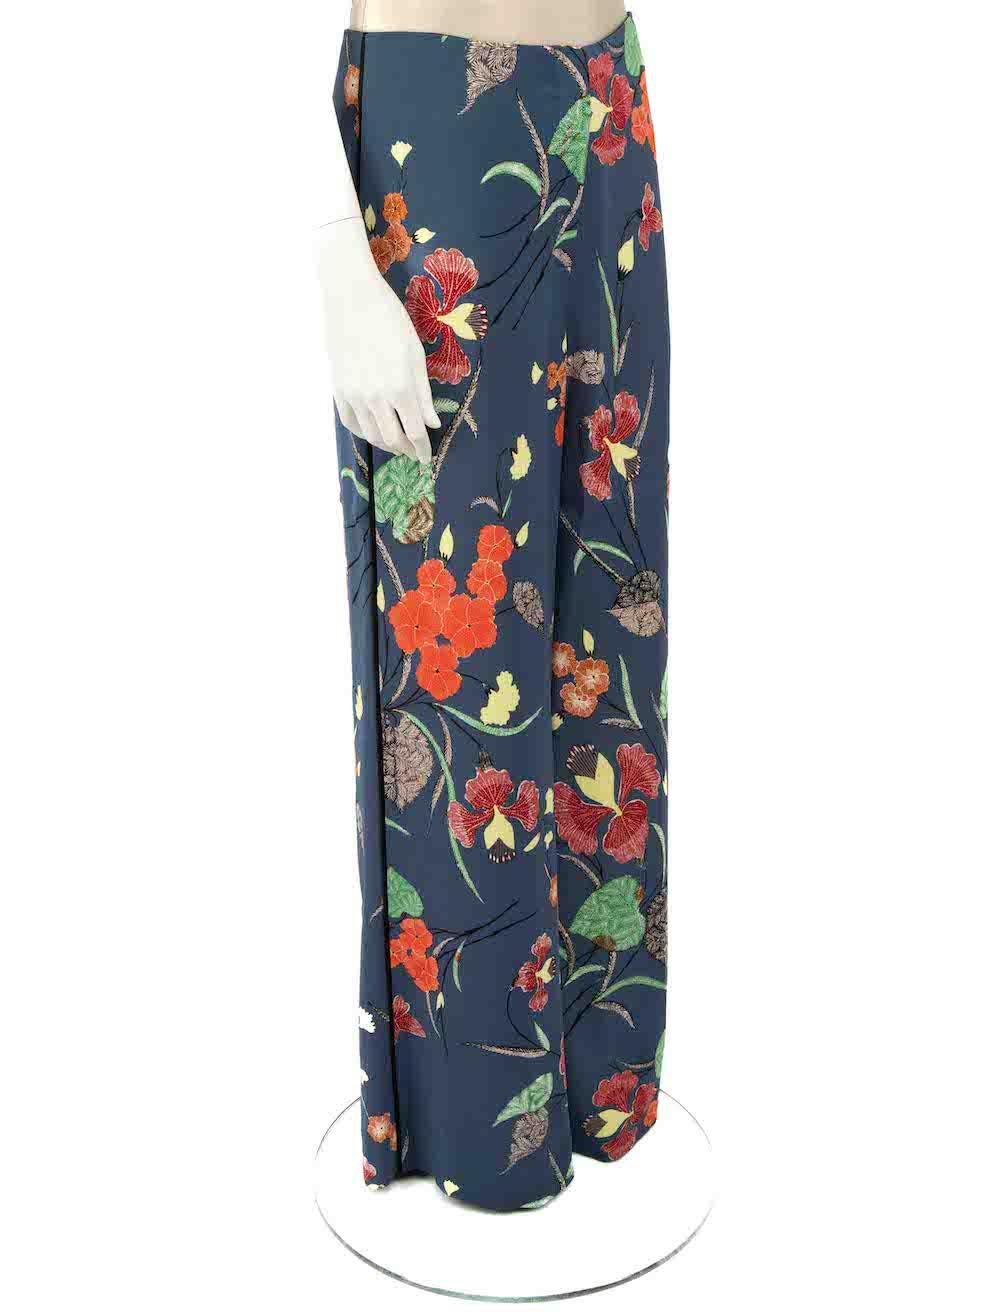 CONDITION is Never worn. No visible wear to trousers is evident on this new Diane Von Furstenberg designer resale item.
 
 Details
 Blue
 Viscose
 Trousers
 Floral patern
 Wide leg
 High rise
 2x Side pockets
 1x Back pocket
 Fly zip, hook and